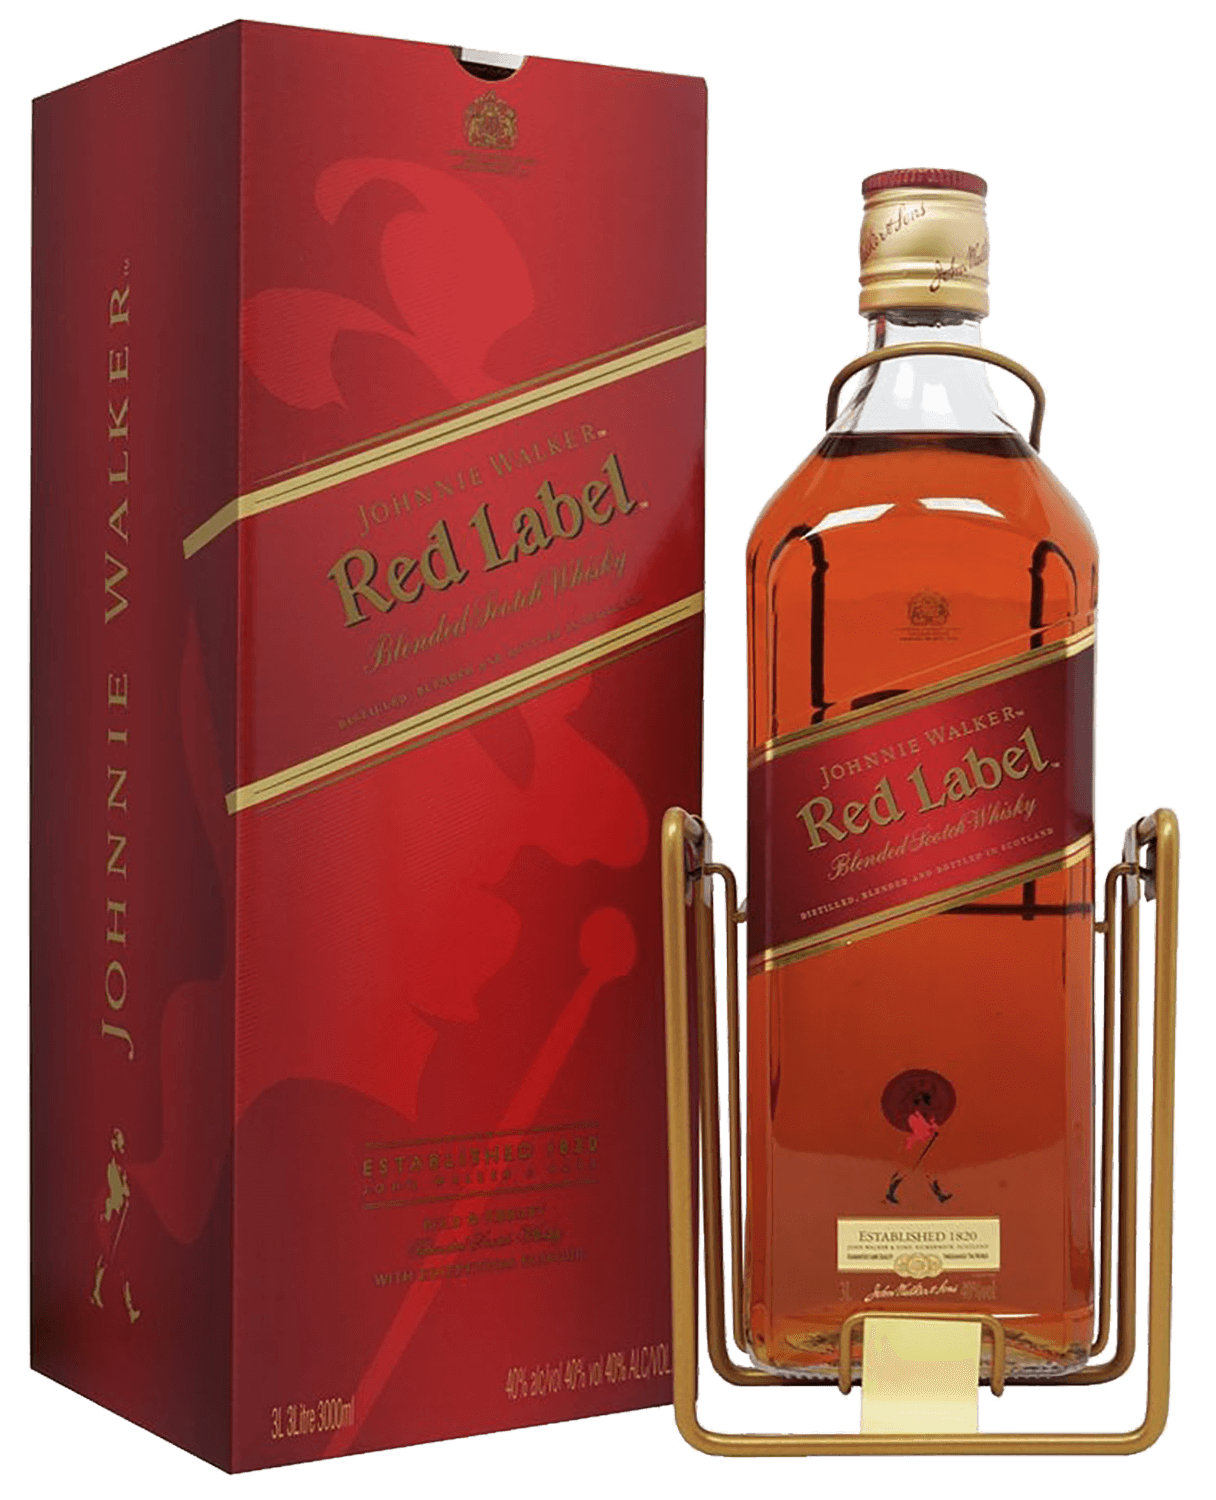 Johnnie Walker Red Label Blended Scotch Whisky (gift box) johnnie walker 18 y o blended scotch whisky gift box